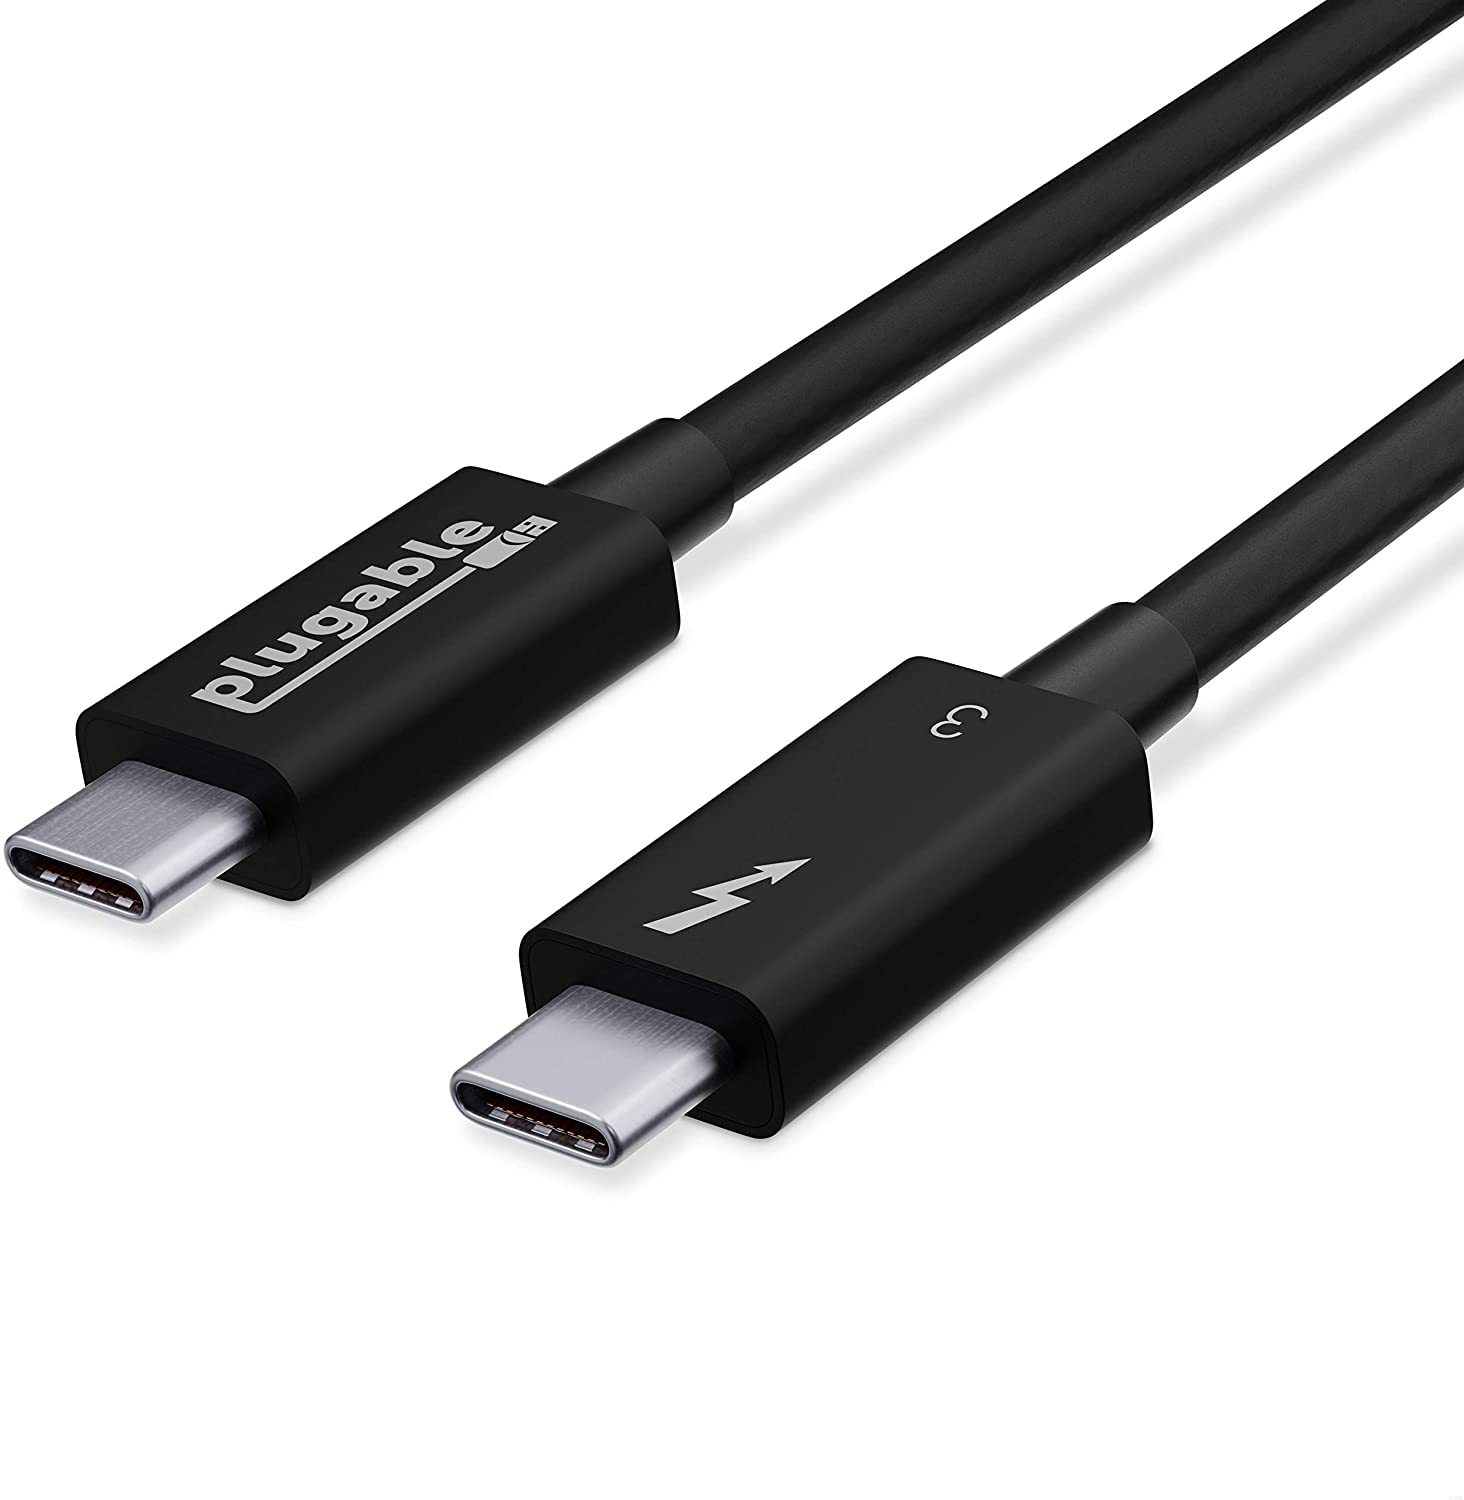 Plugable Apple 5Amps Thunderbolt 3 Cable, 2.6-Foot